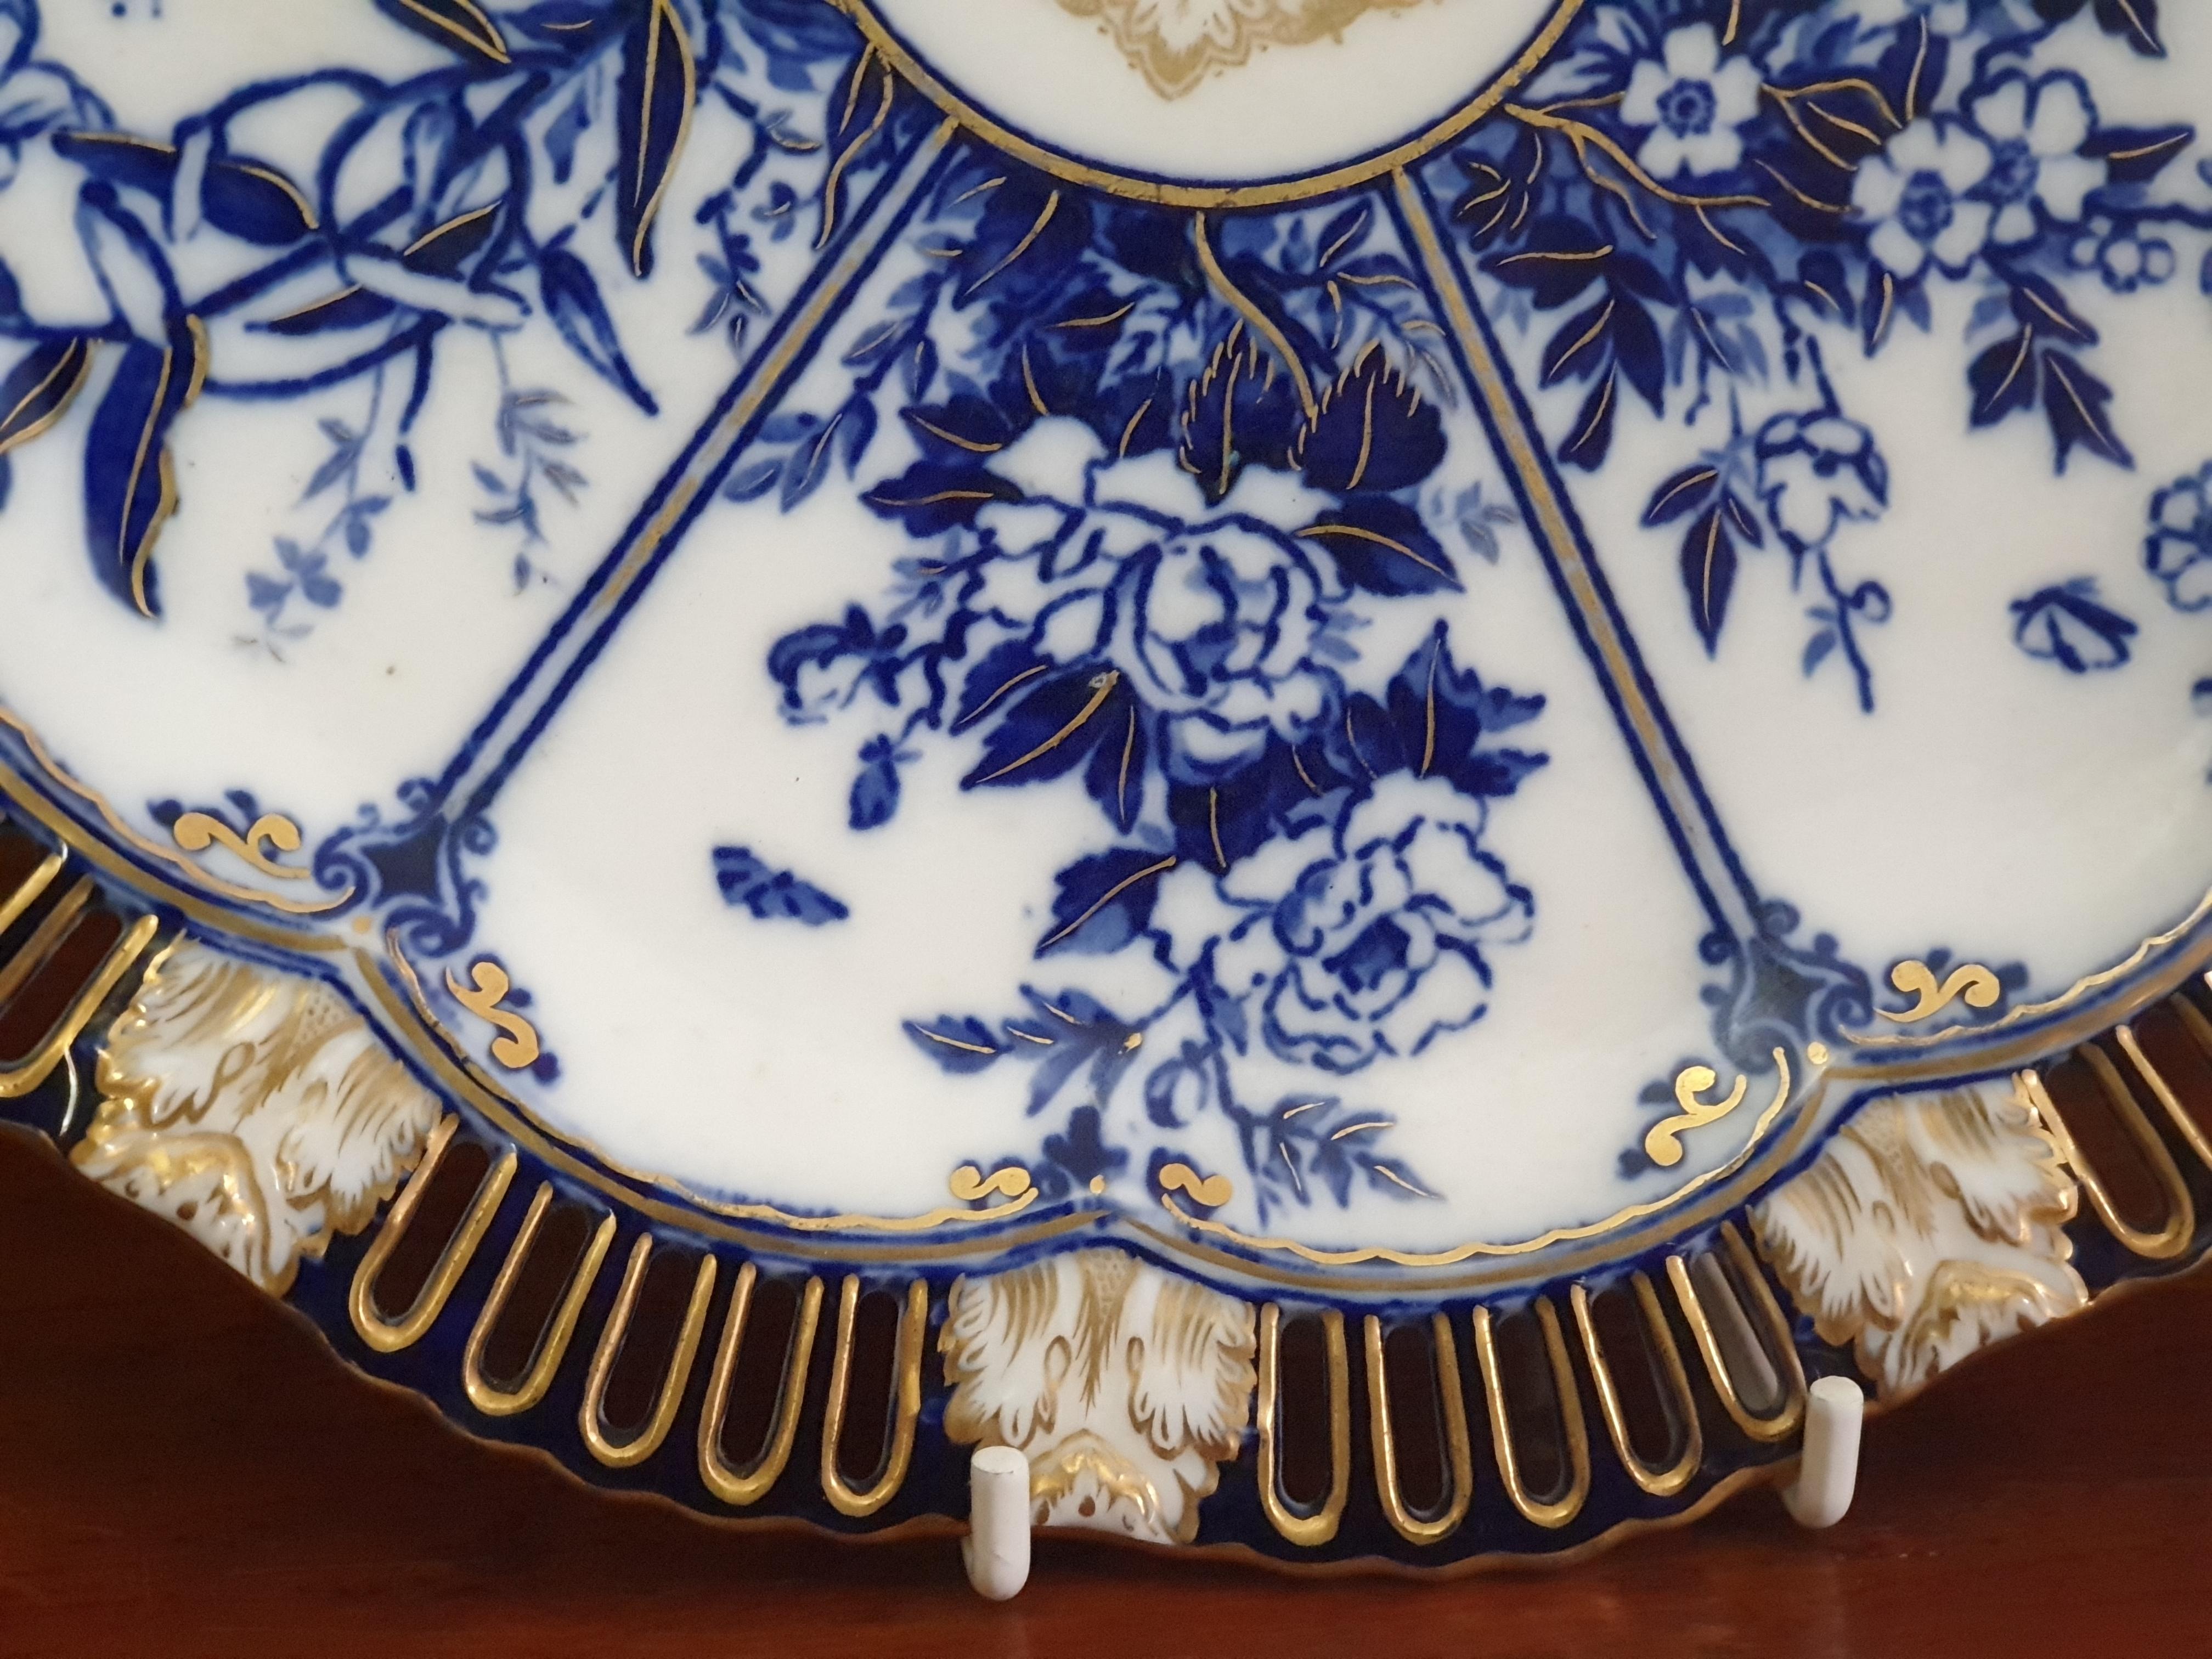 Reticulated Floral Panelled Lotus English Coalport Set Of 4 Cabinet Plates In Good Condition For Sale In London, GB